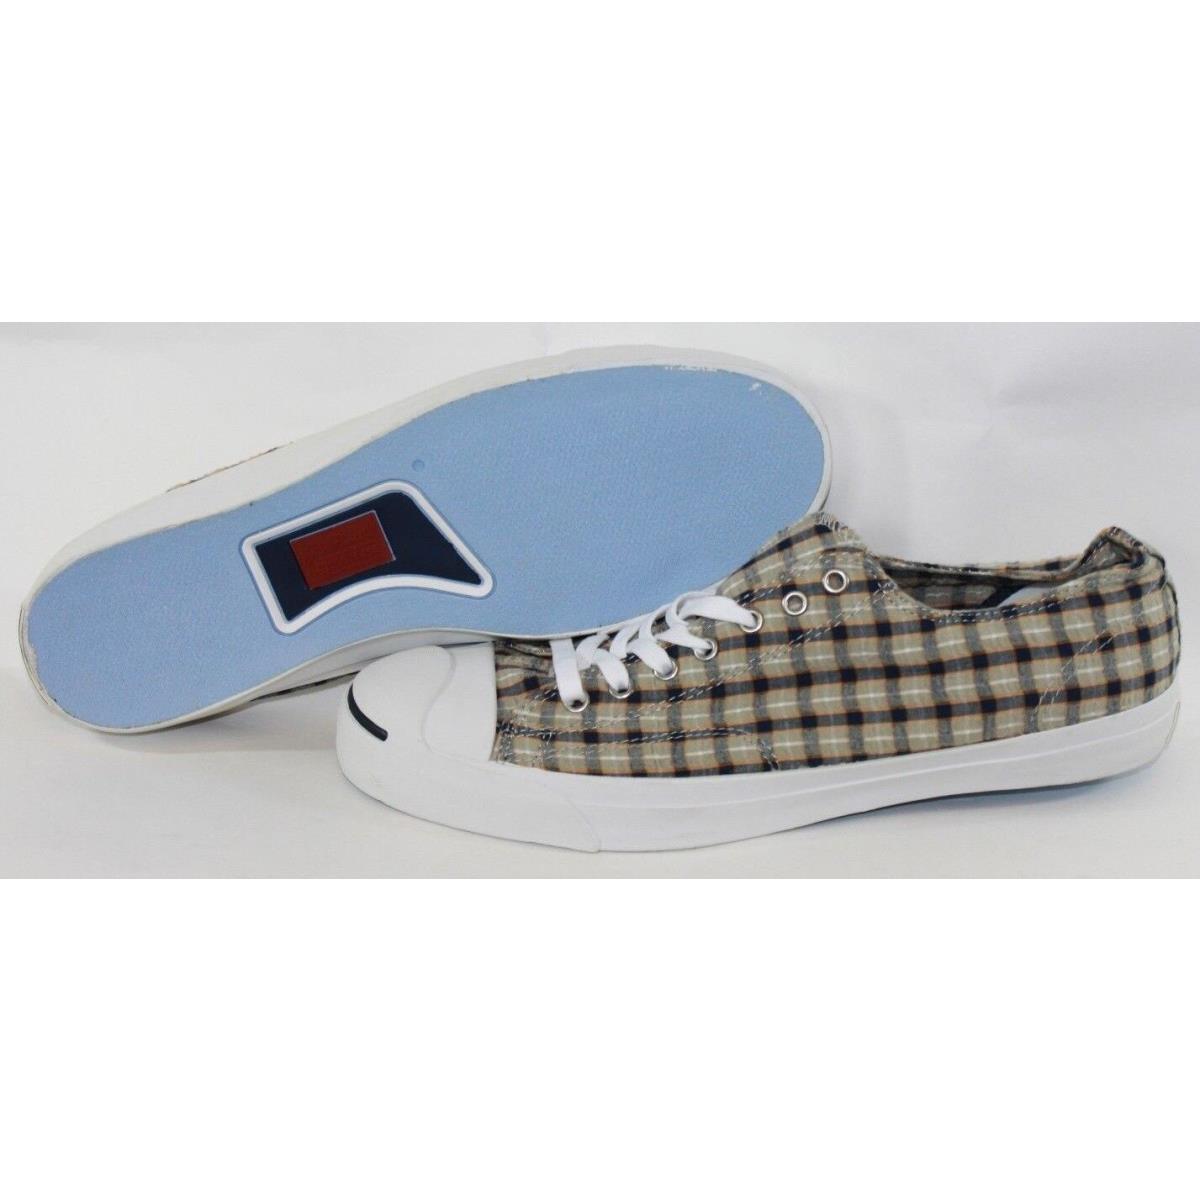 Mens Converse 121553 Jack Purcell Ltt Ox Grey Navy Plaid Sneakers Shoes